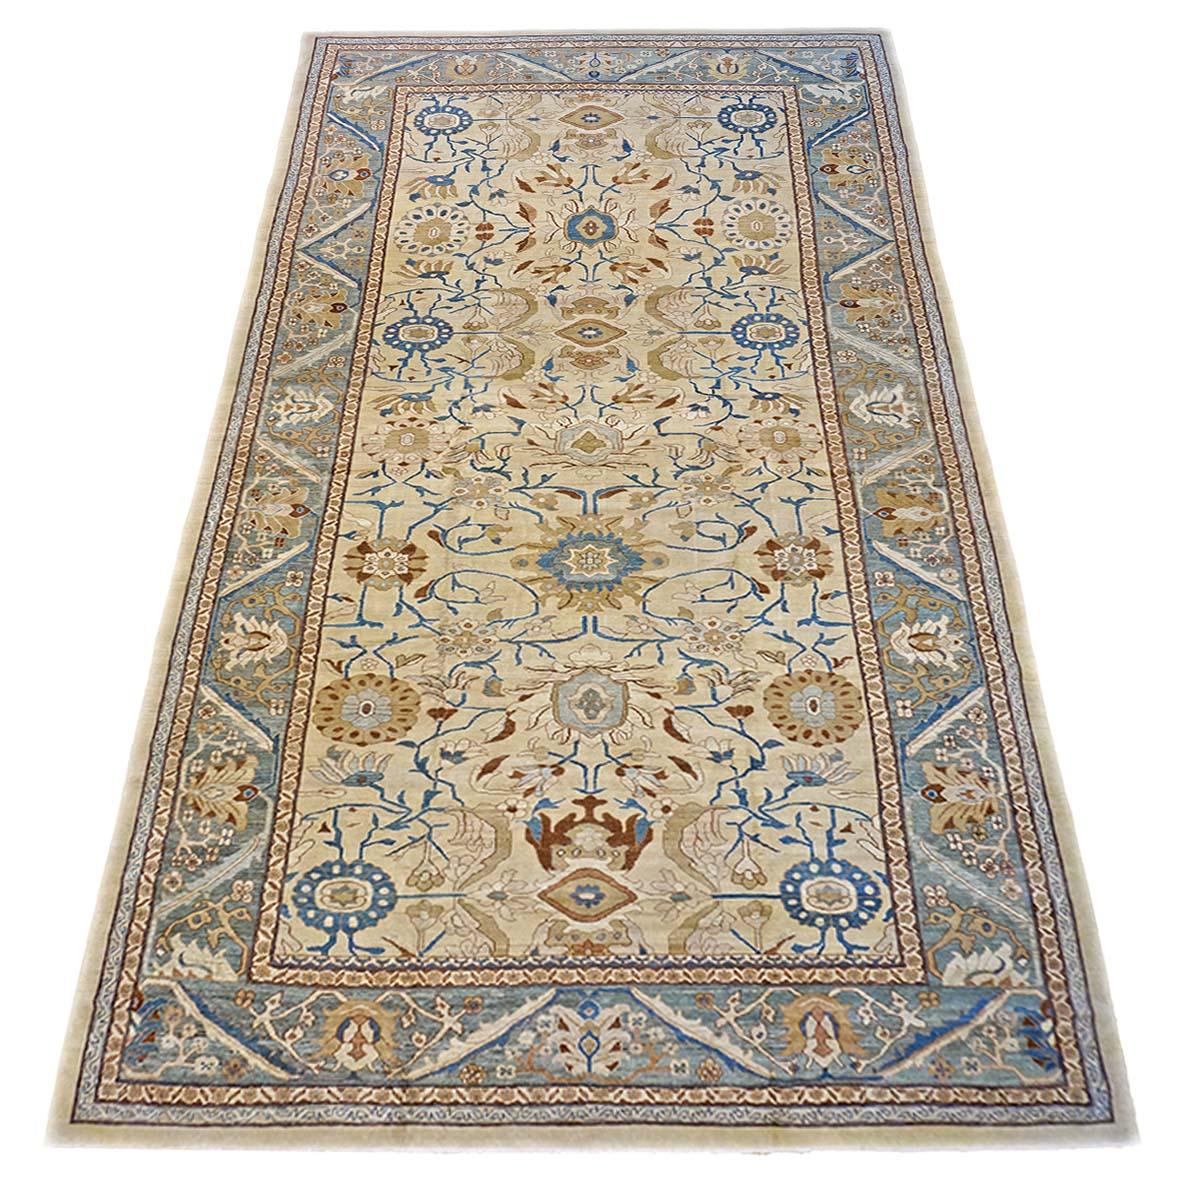 Ashly Fine Rugs presents an antique recreation of an original Persian Sultanabad 13x20 Ivory, Blue, & Gold Handmade Area Rug. Part of our own previous production, this antique recreation was thought of and created in-house and 100% handmade in